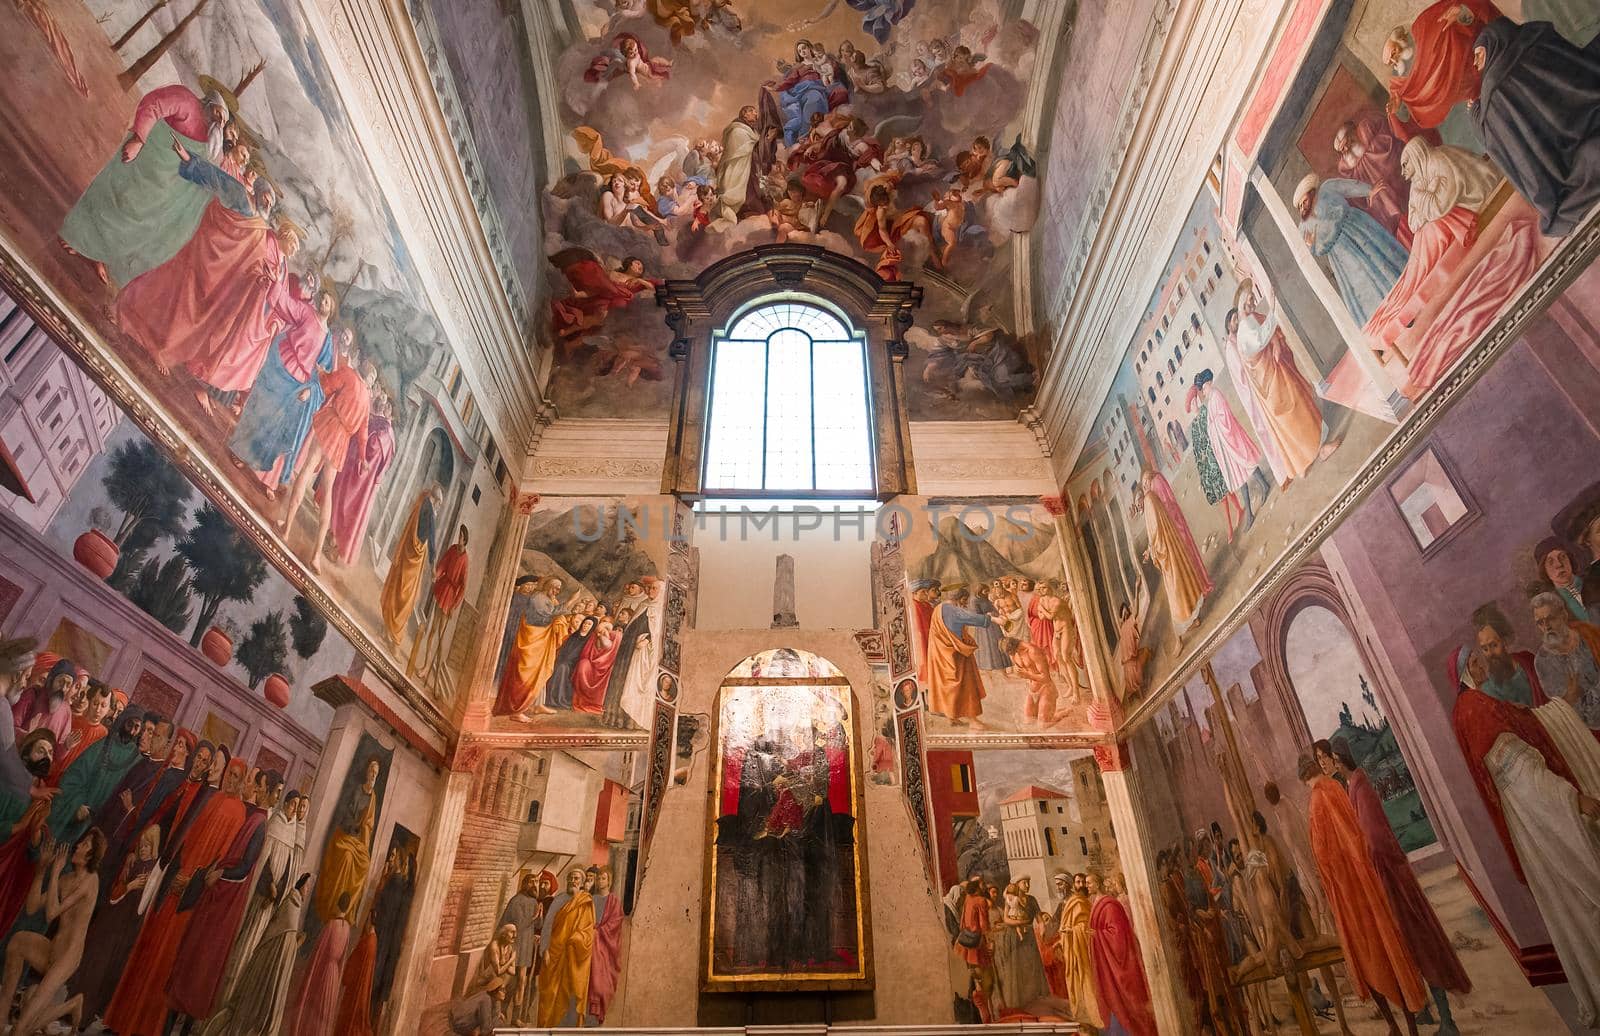 FLORENCE, ITALY, OCTOBER 23, 2015 : interiors and architectural details of Brancacci chapel, october 23, 2015 in Florence, Italy